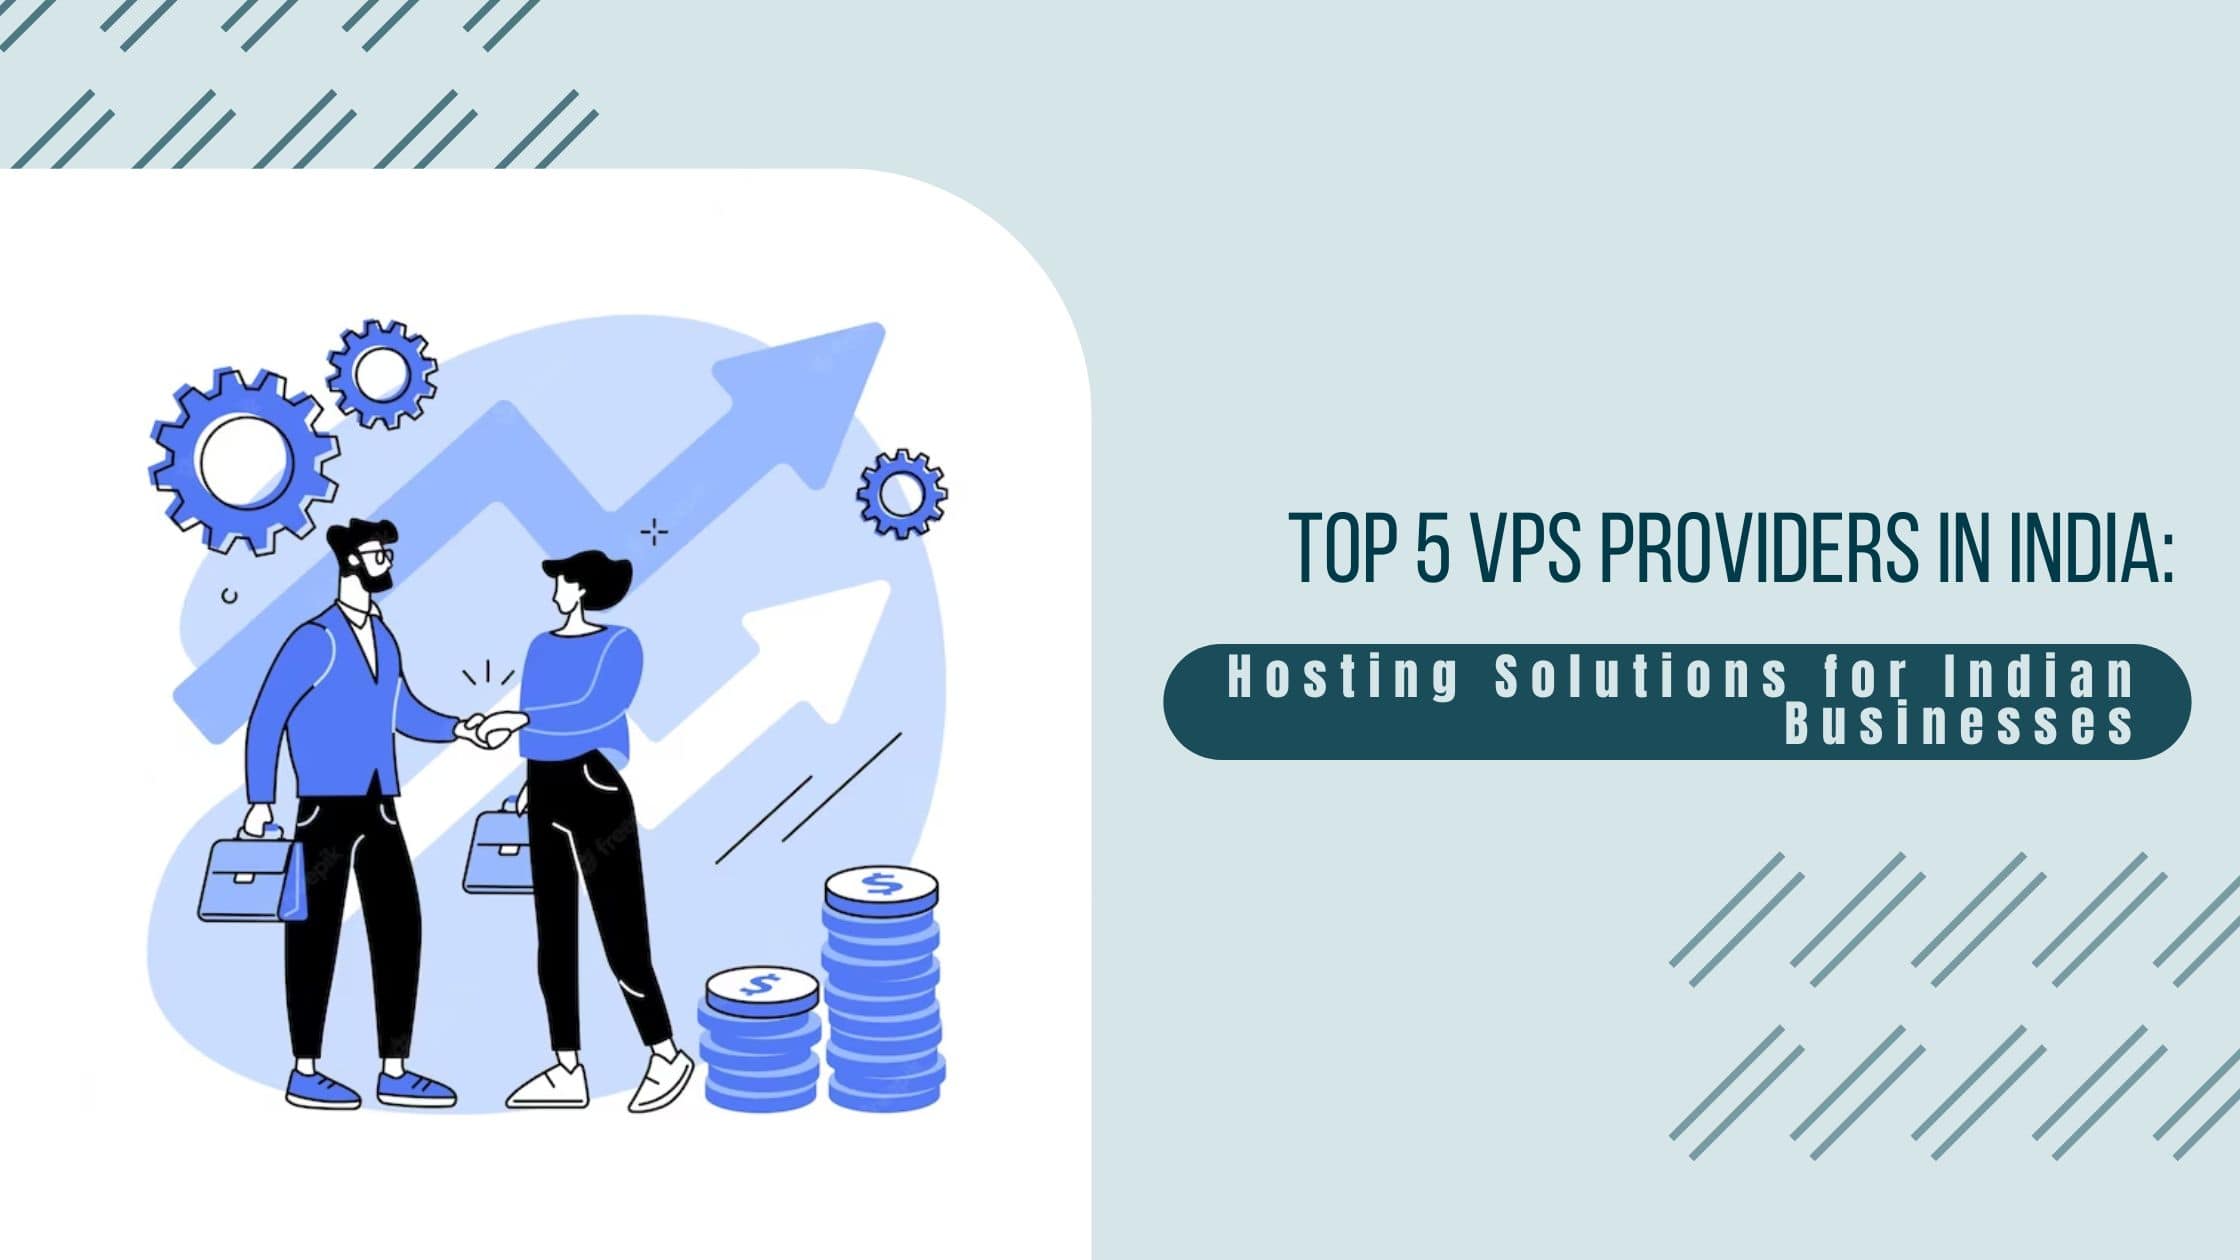 Top 5 VPS Providers in India: Hosting Solutions for Indian Businesses